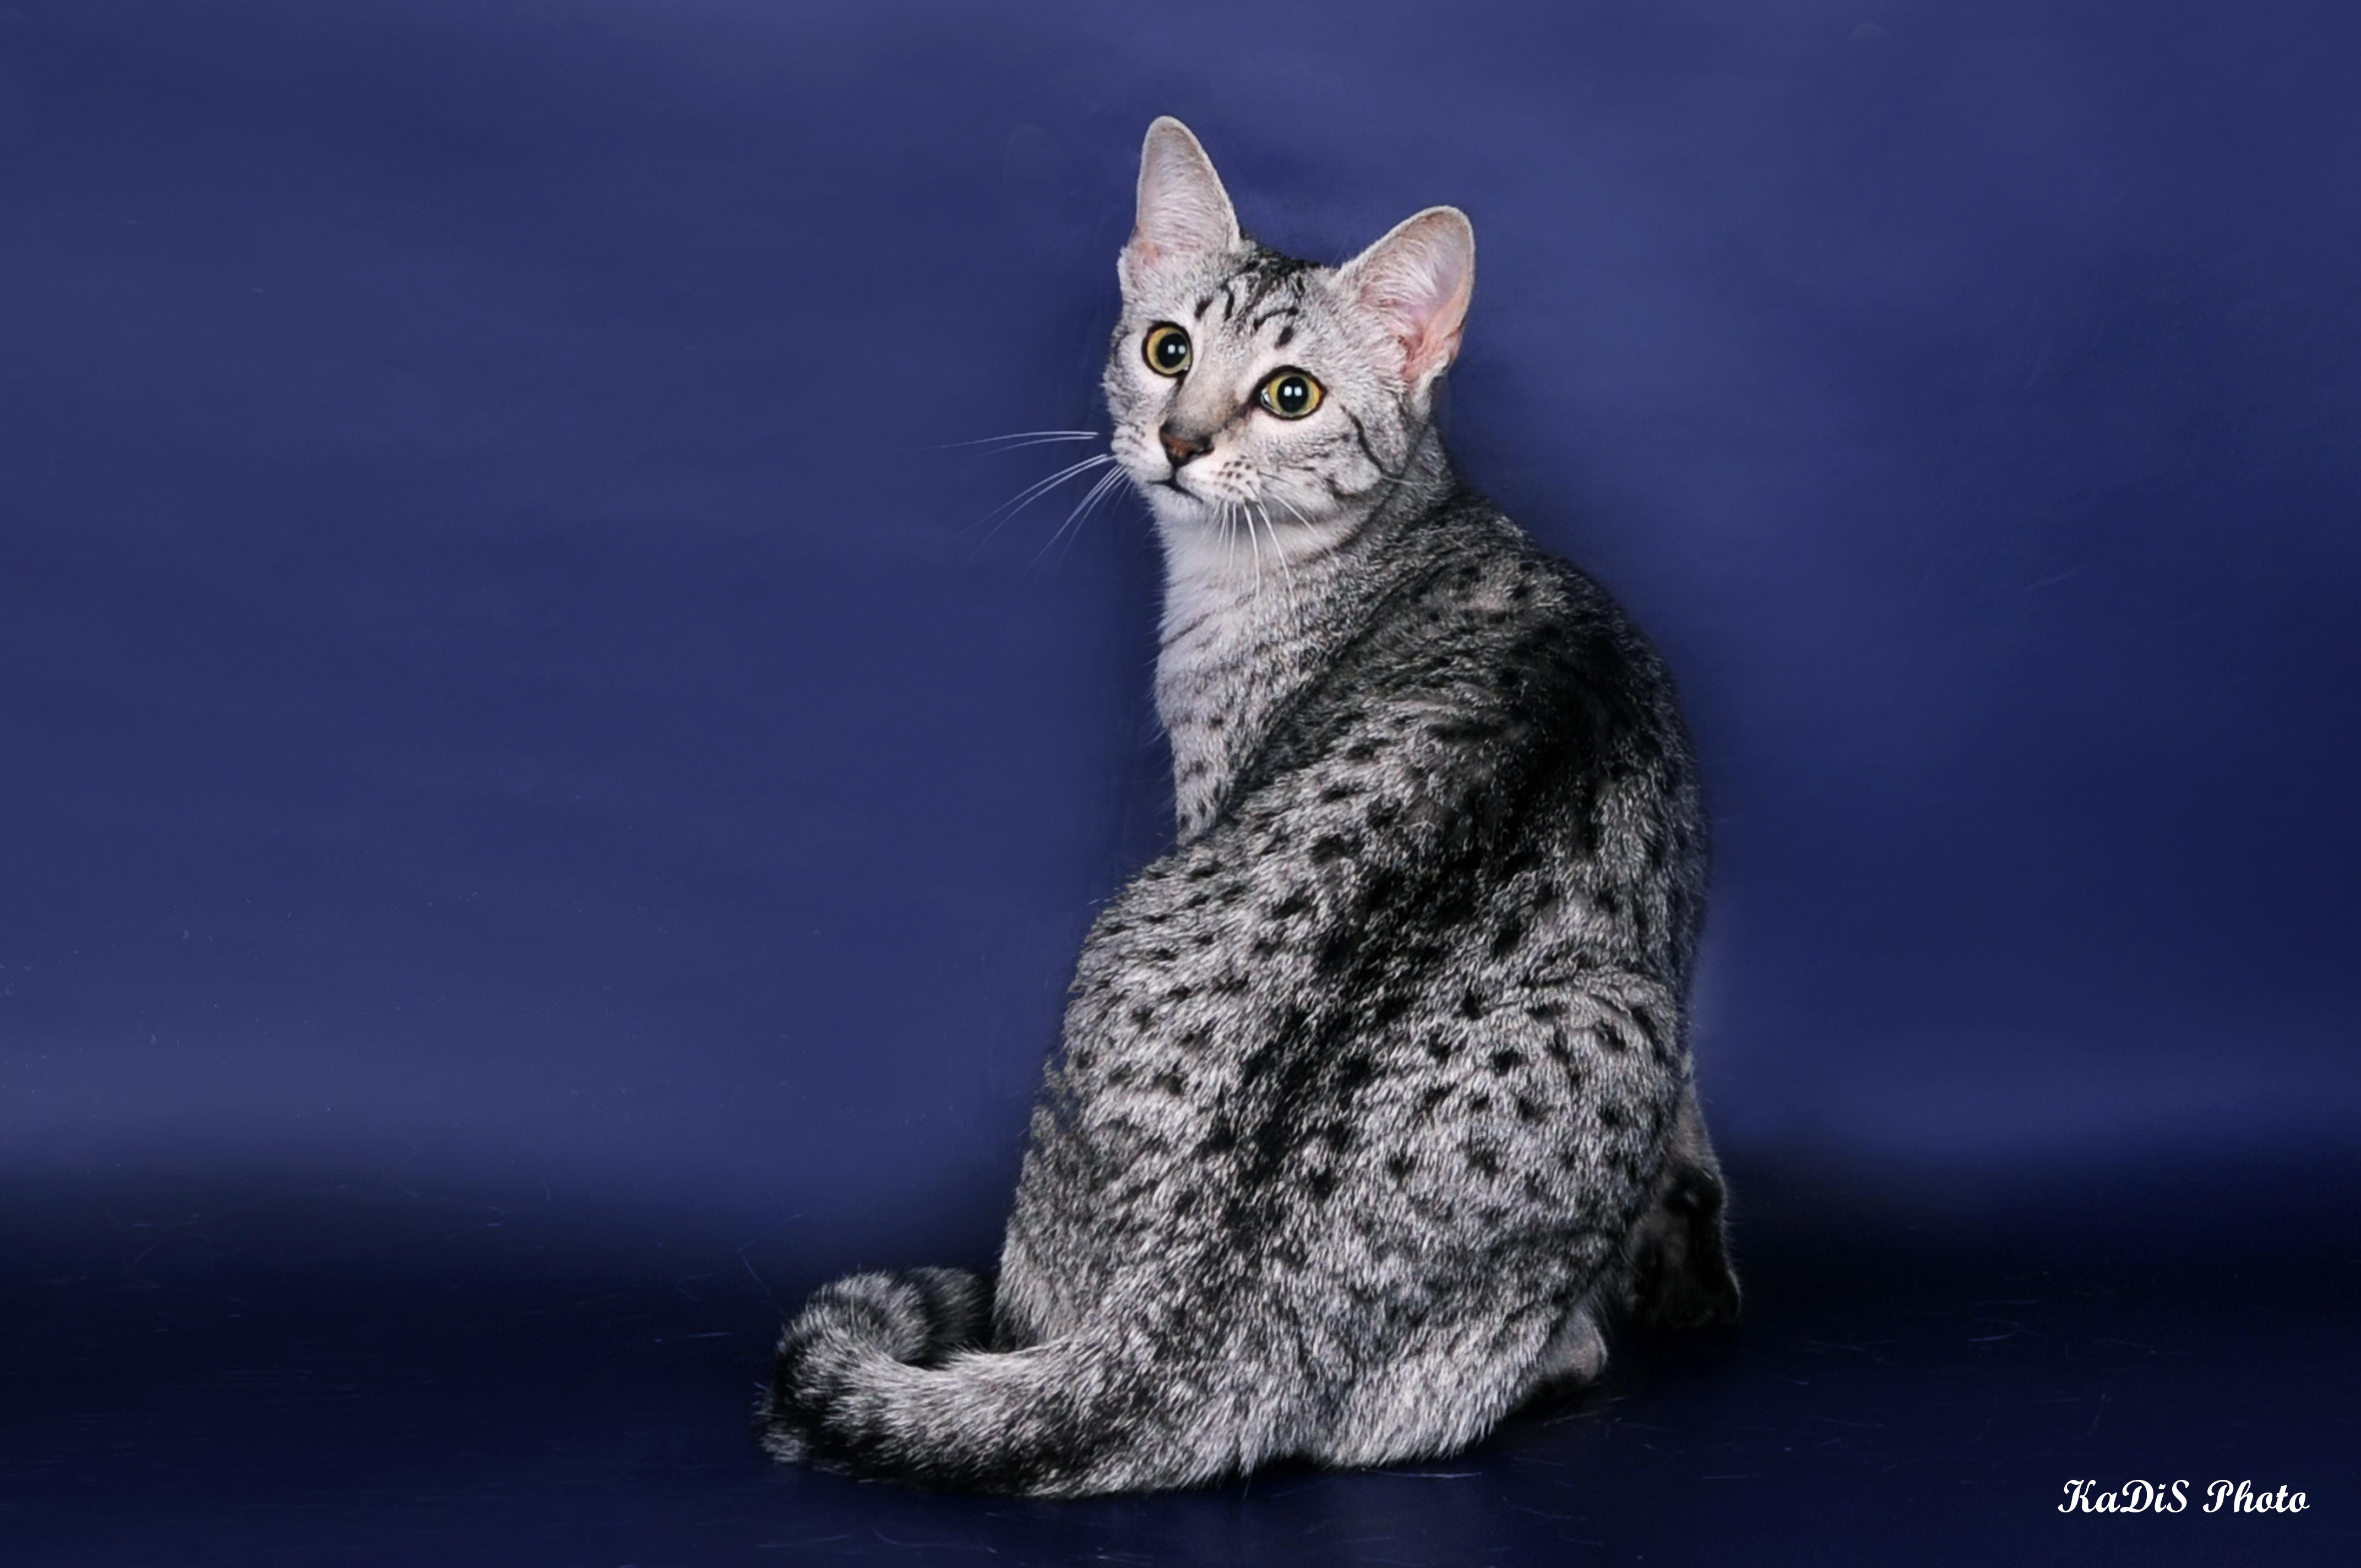 Egyptian Mau on a blue background wallpaper and image